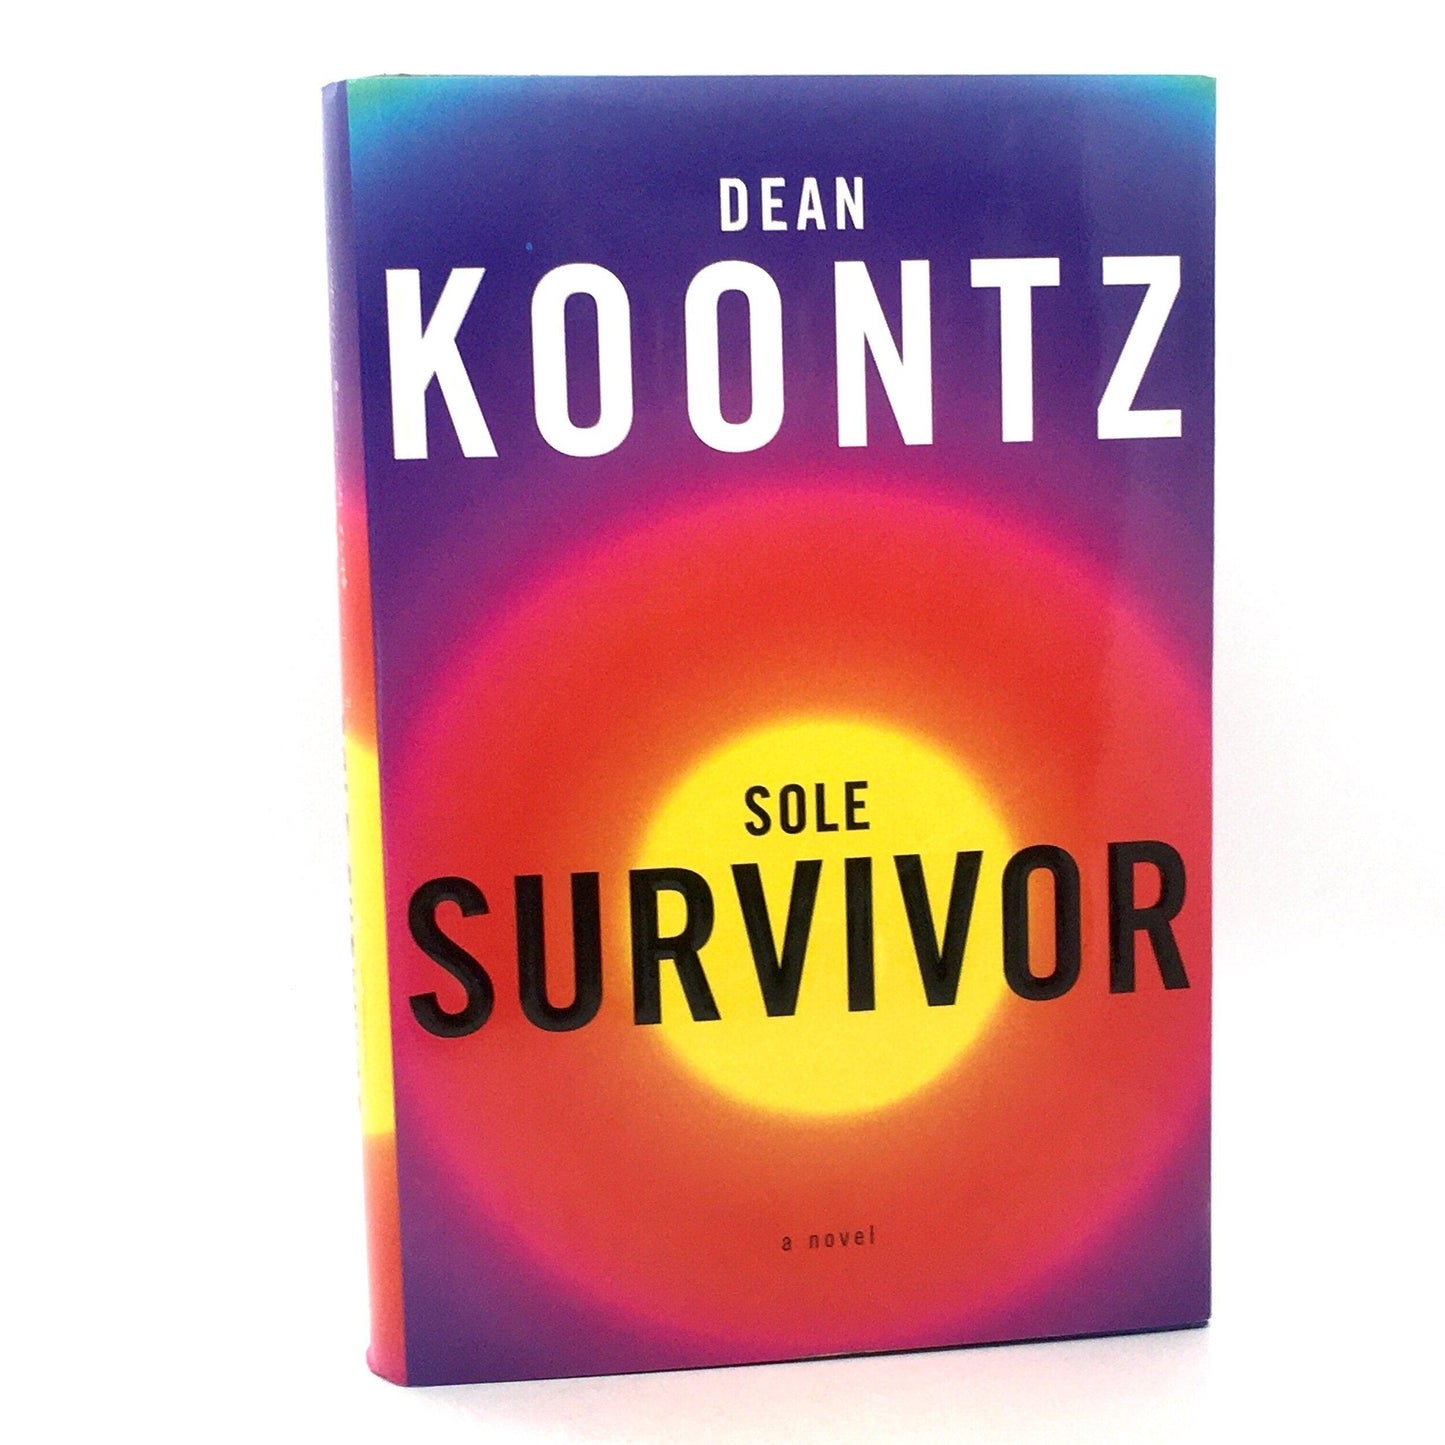 KOONTZ, Dean "Sole Survivor" [Alfred A. Knopf, 1997] 1st Edition (Signed) - Buzz Bookstore